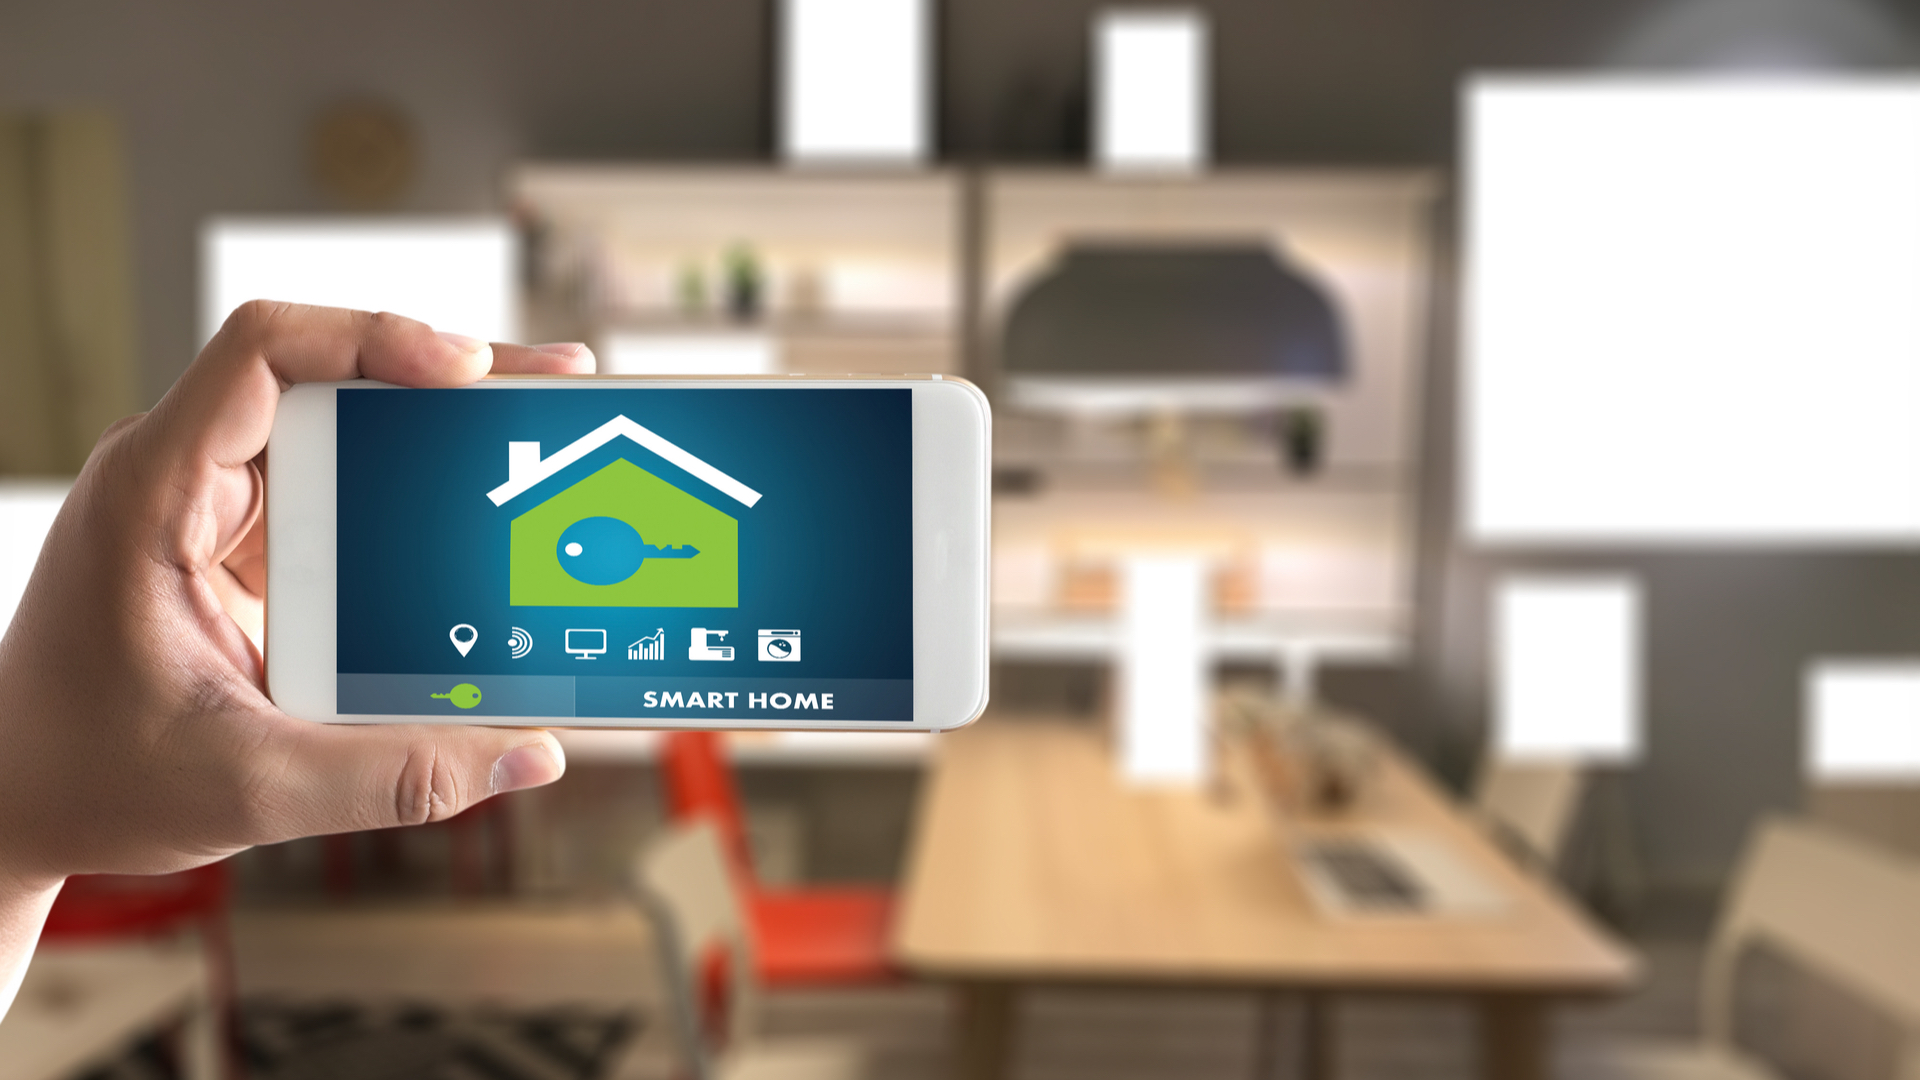 Home Wi-Fi QoE: Post-AI Hype Connected Home Management - ASSIA1920 x 1080